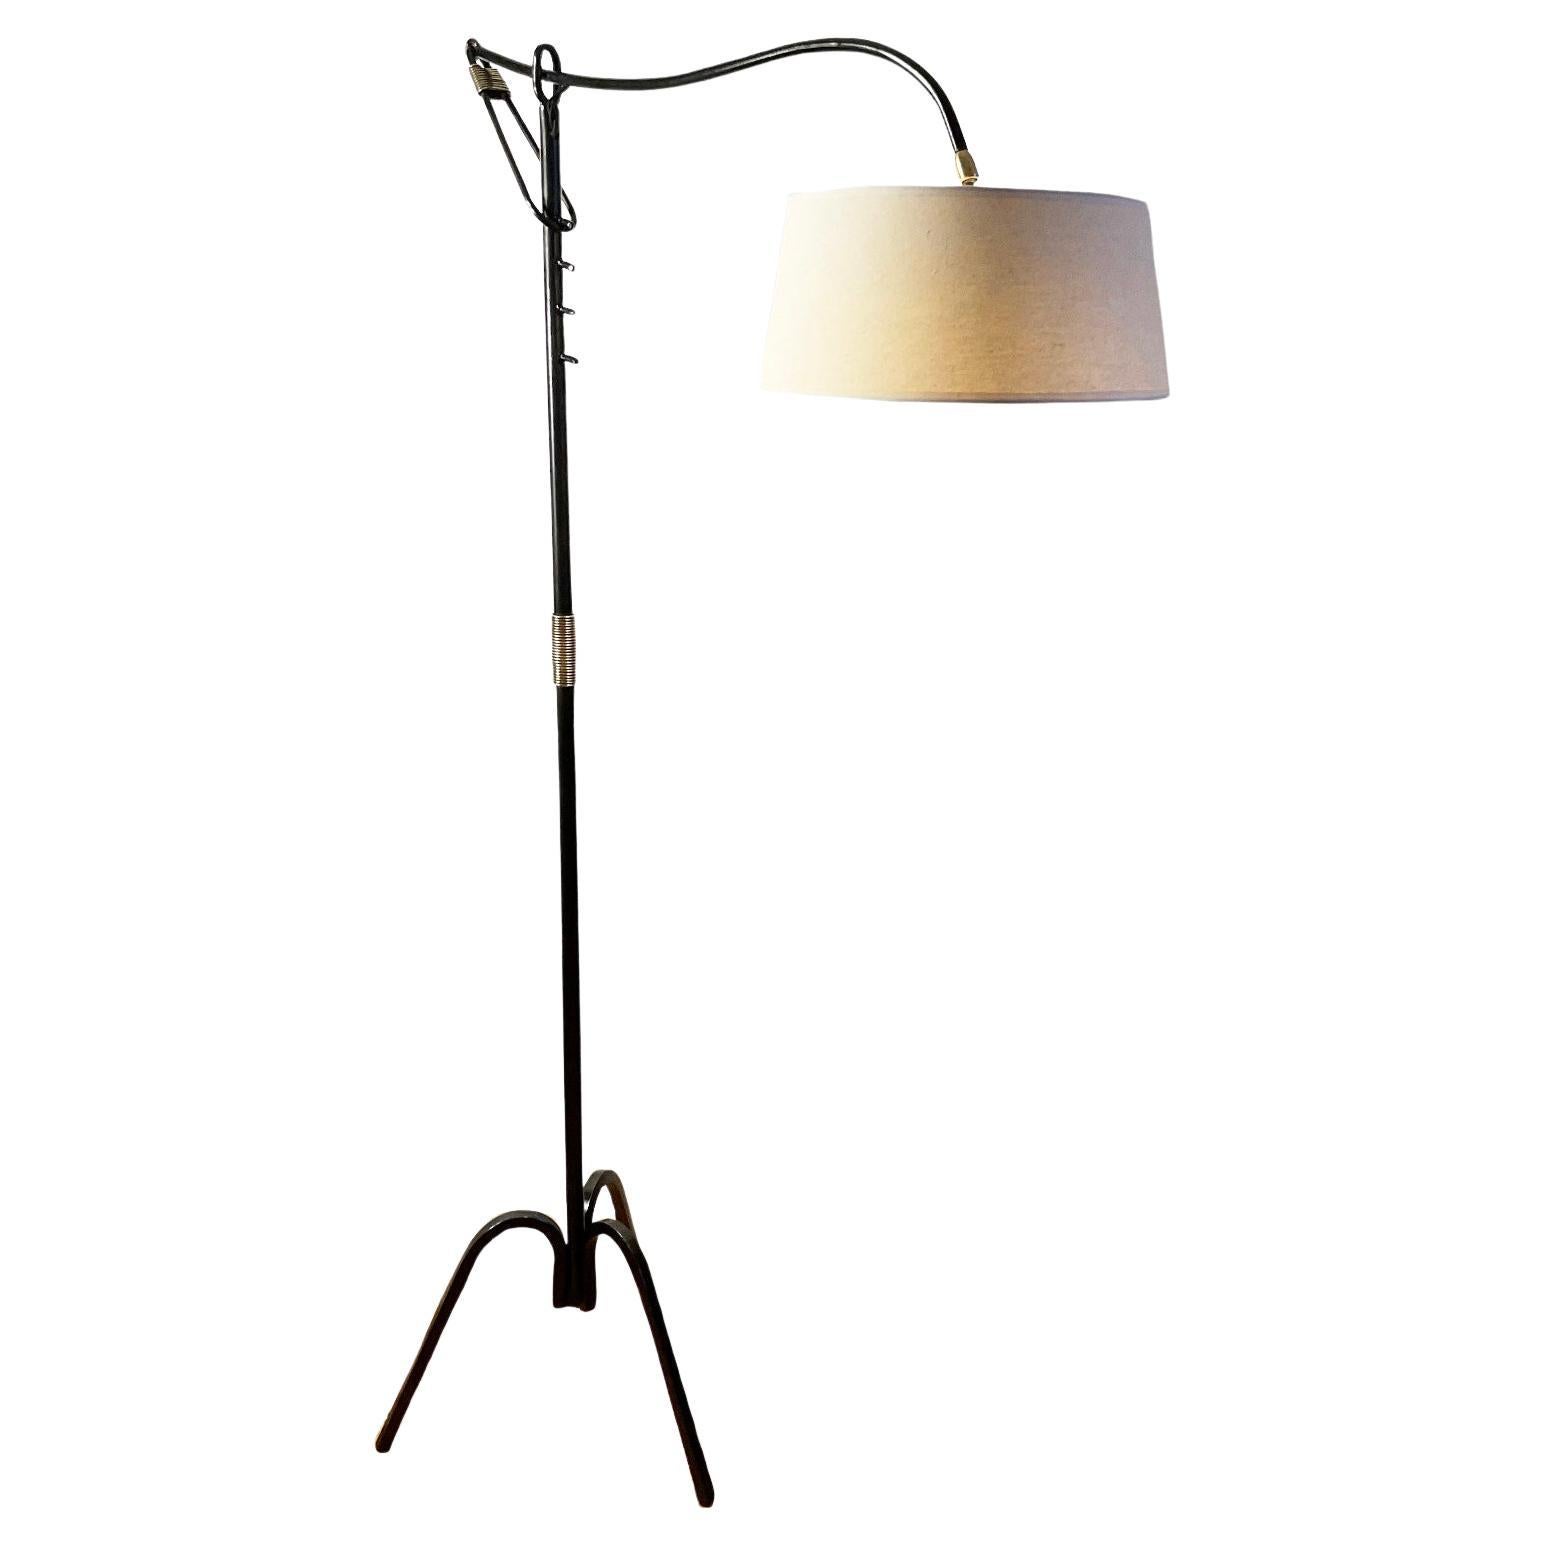 1950s Floor Lamp Attributed to Jacques Adnet with a Crémallière system For Sale